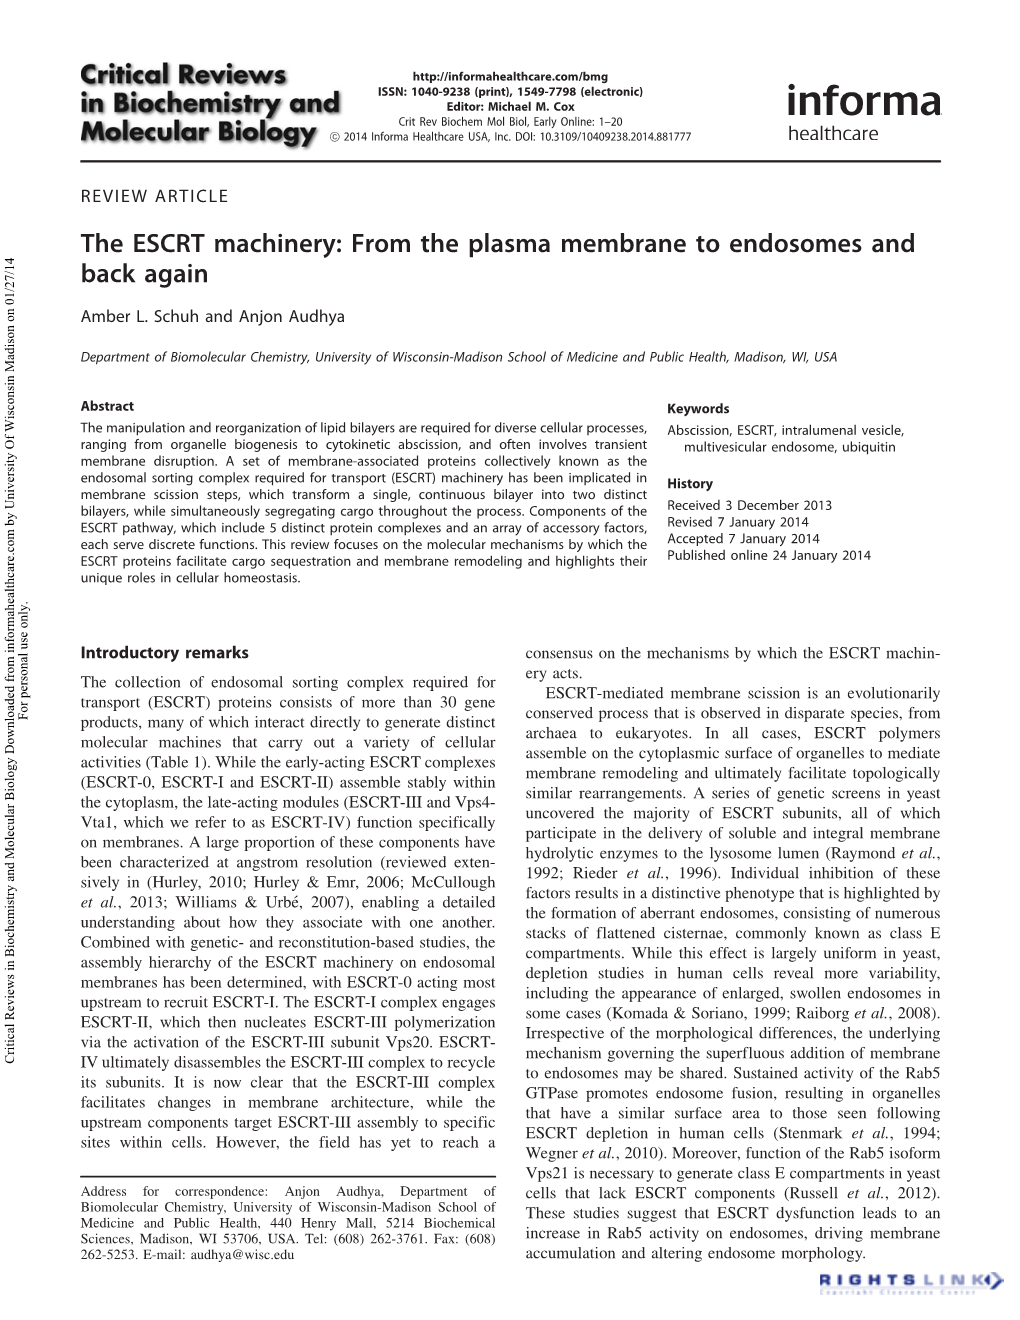 The ESCRT Machinery: from the Plasma Membrane to Endosomes and Back Again